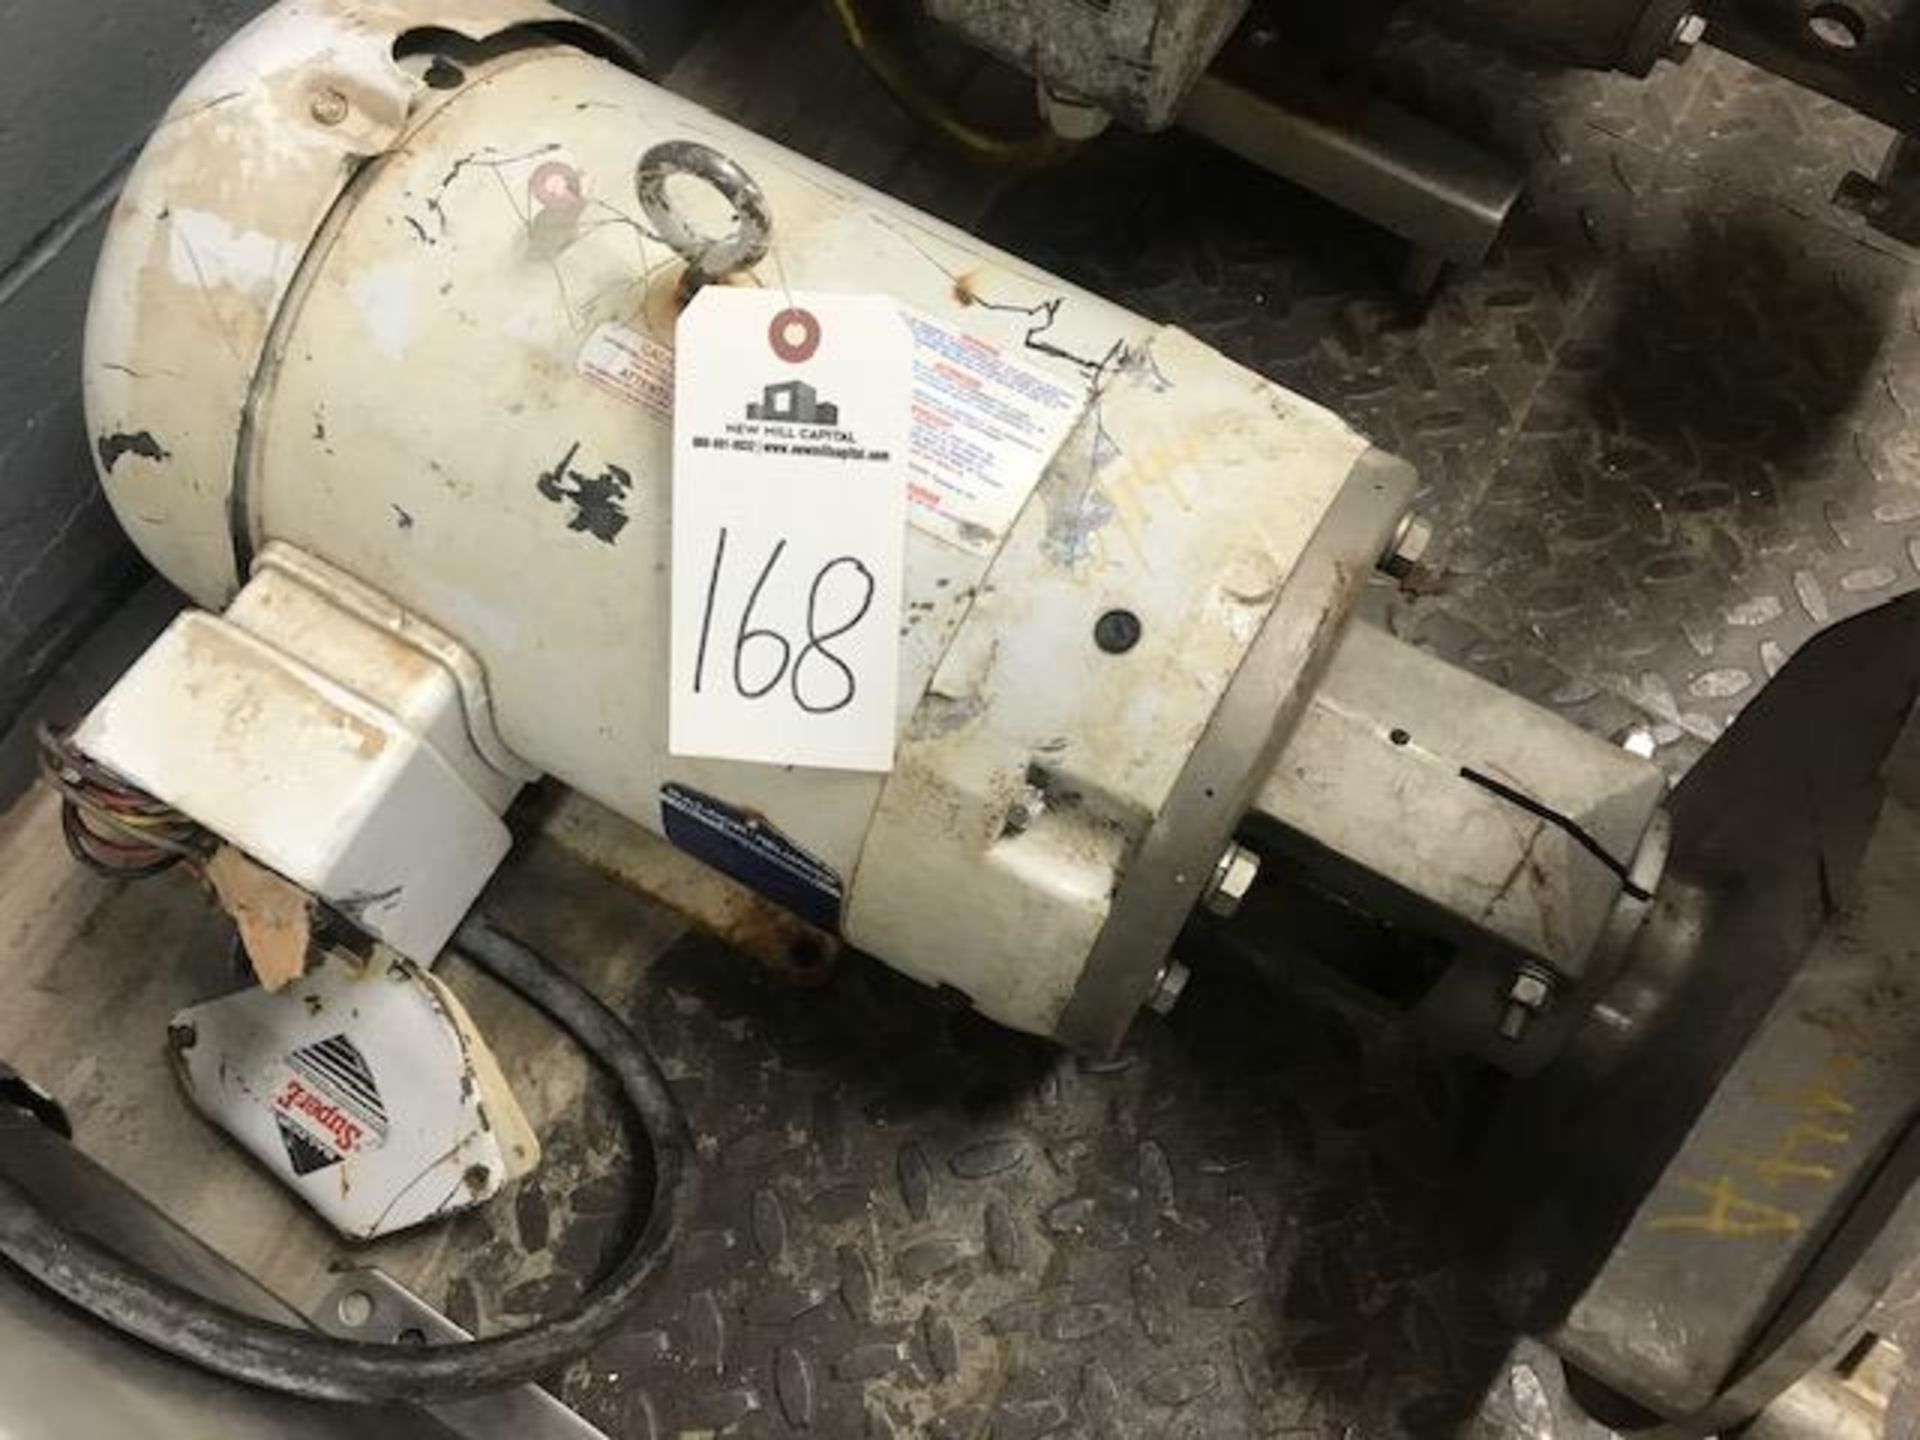 Fristam Pump, Model FPX, 10hp with Check Valve, 2.5" inlet, 2" outlet Serial Number 742982155 - Image 2 of 3